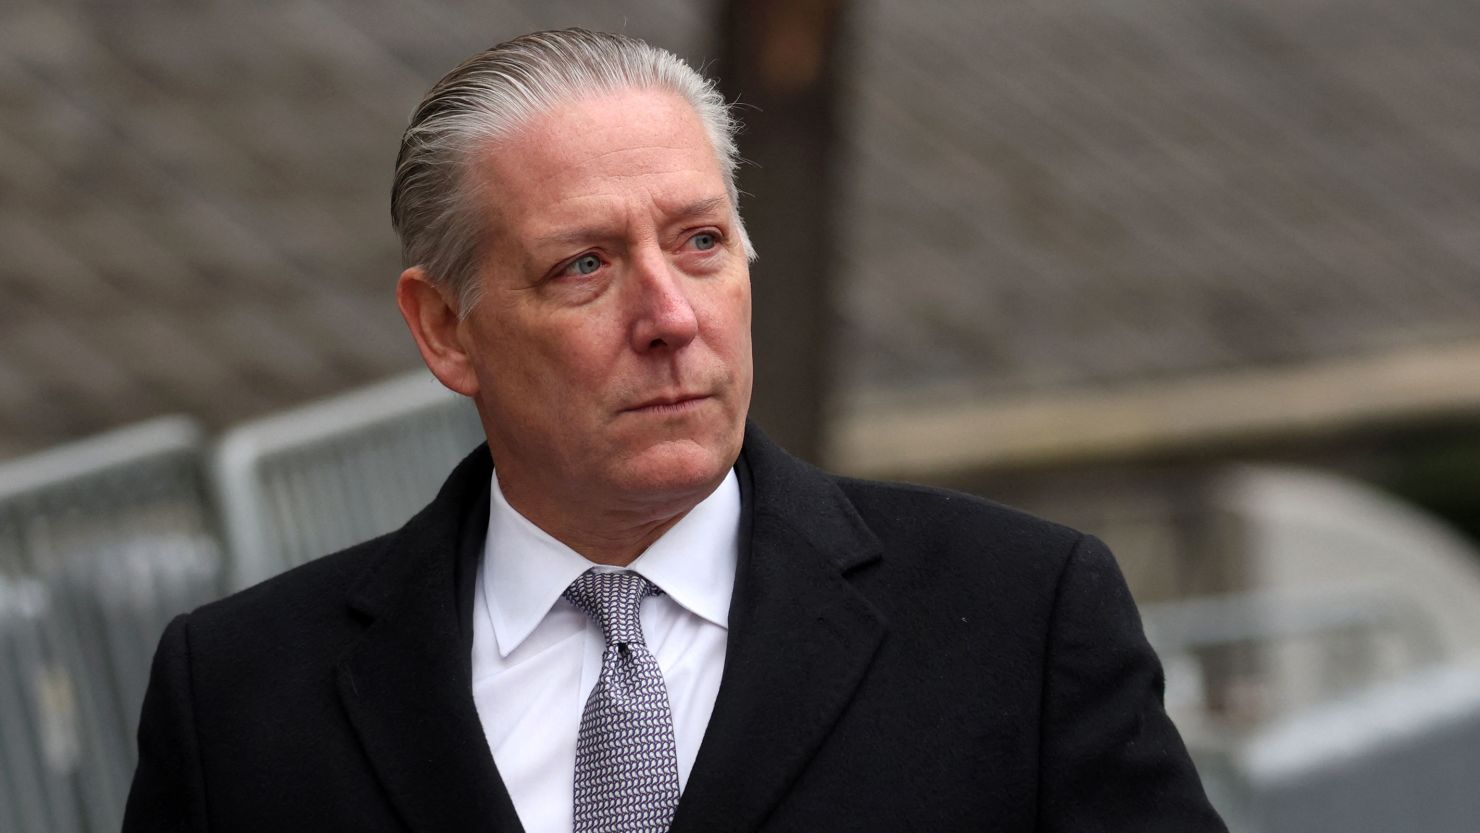 Former FBI official Charles McGonigal, who led the agency's counterintelligence division in New York, arrives at Manhattan federal court in New York City on February 9, 2023.